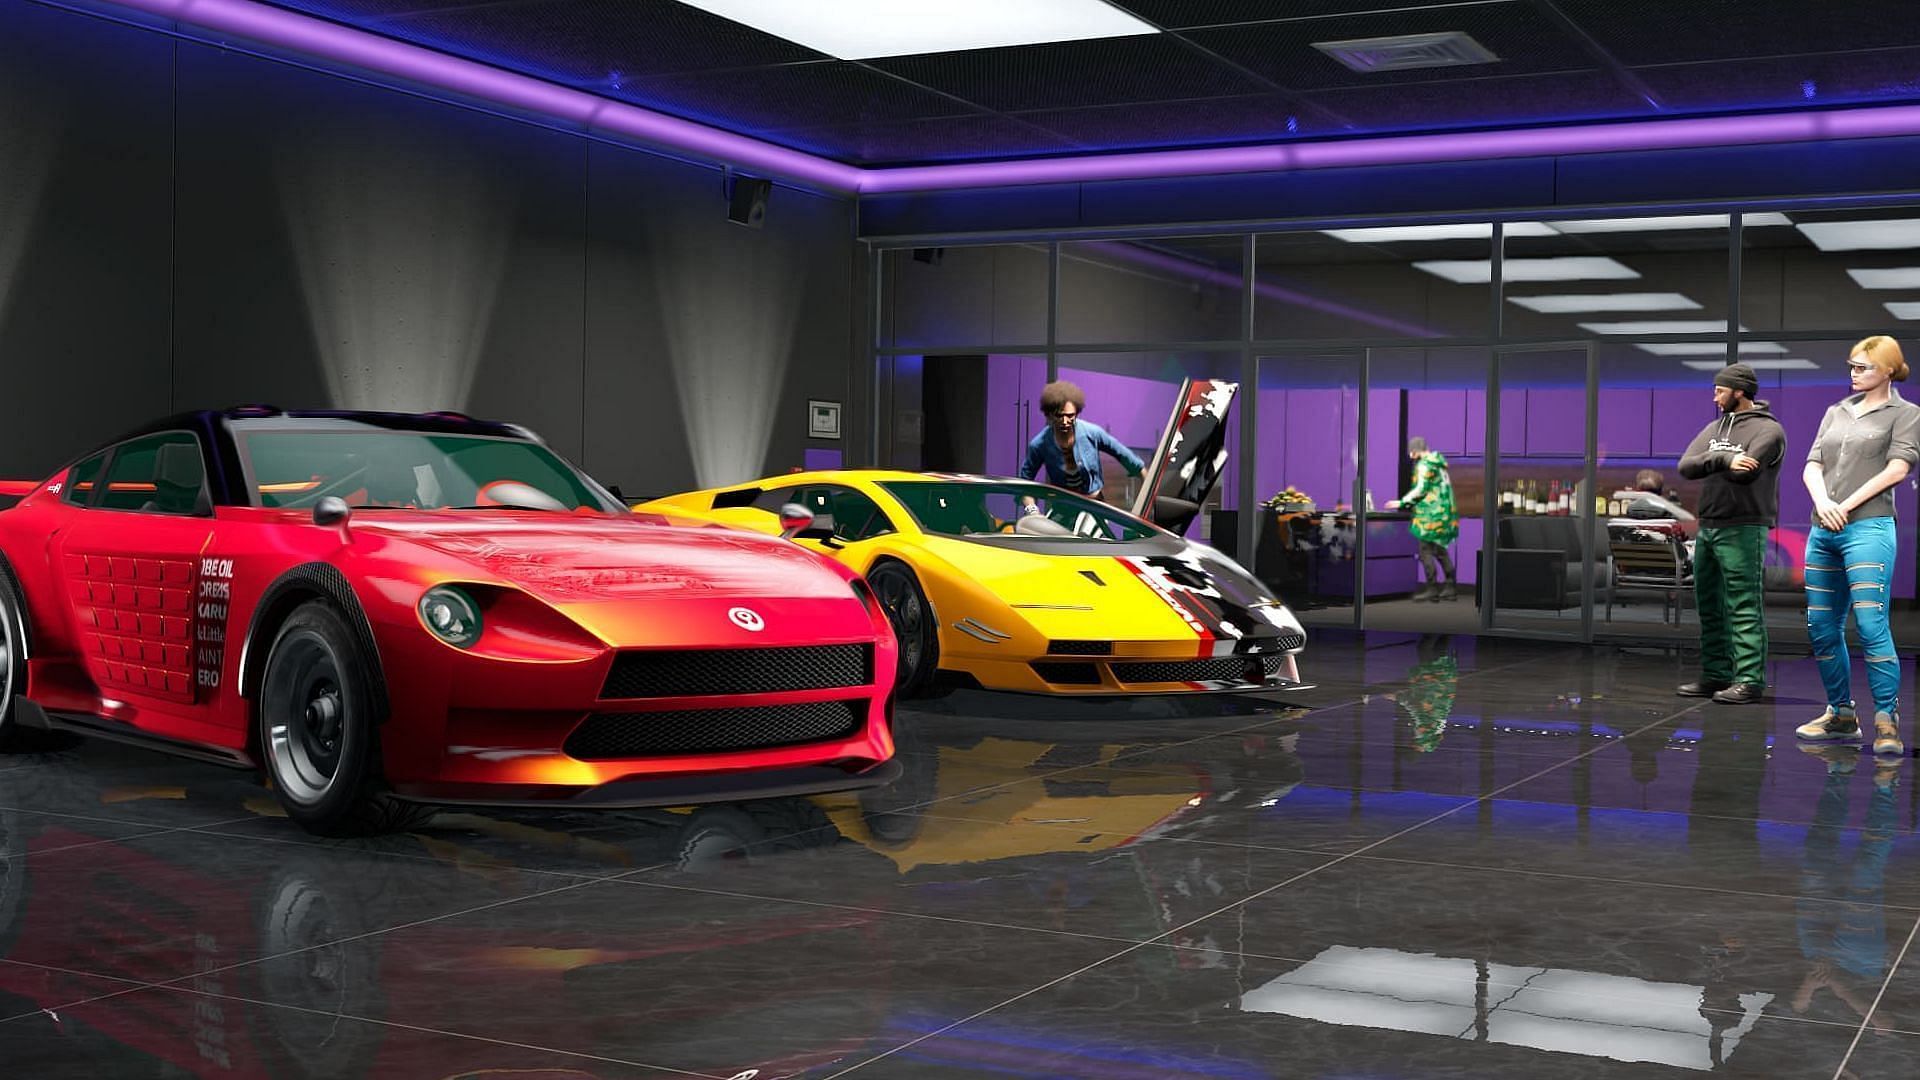 An example of a player showing off their rides to their friends (Image via Rockstar Games)